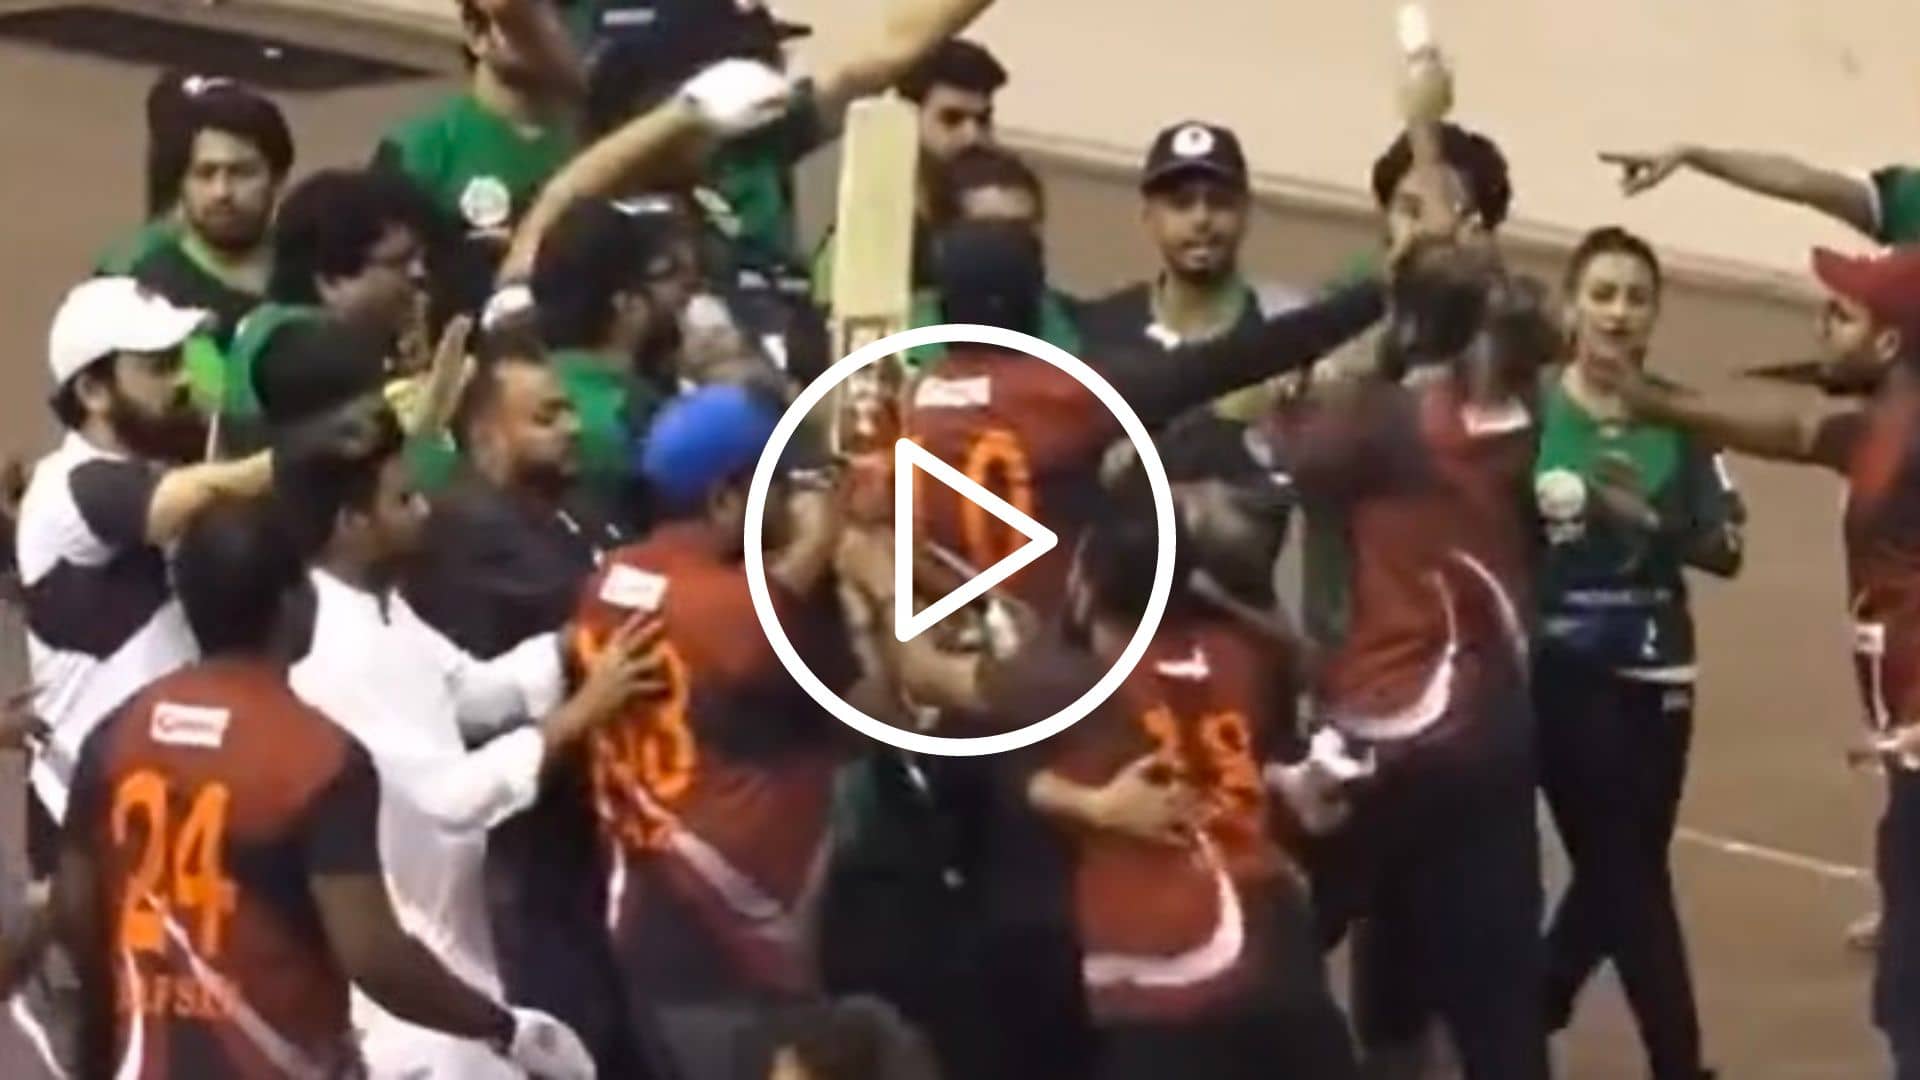 [Watch] Bangladesh Celebrity Cricket League Turned Into WWE Royal Rumble After Celebrities Start Fracas